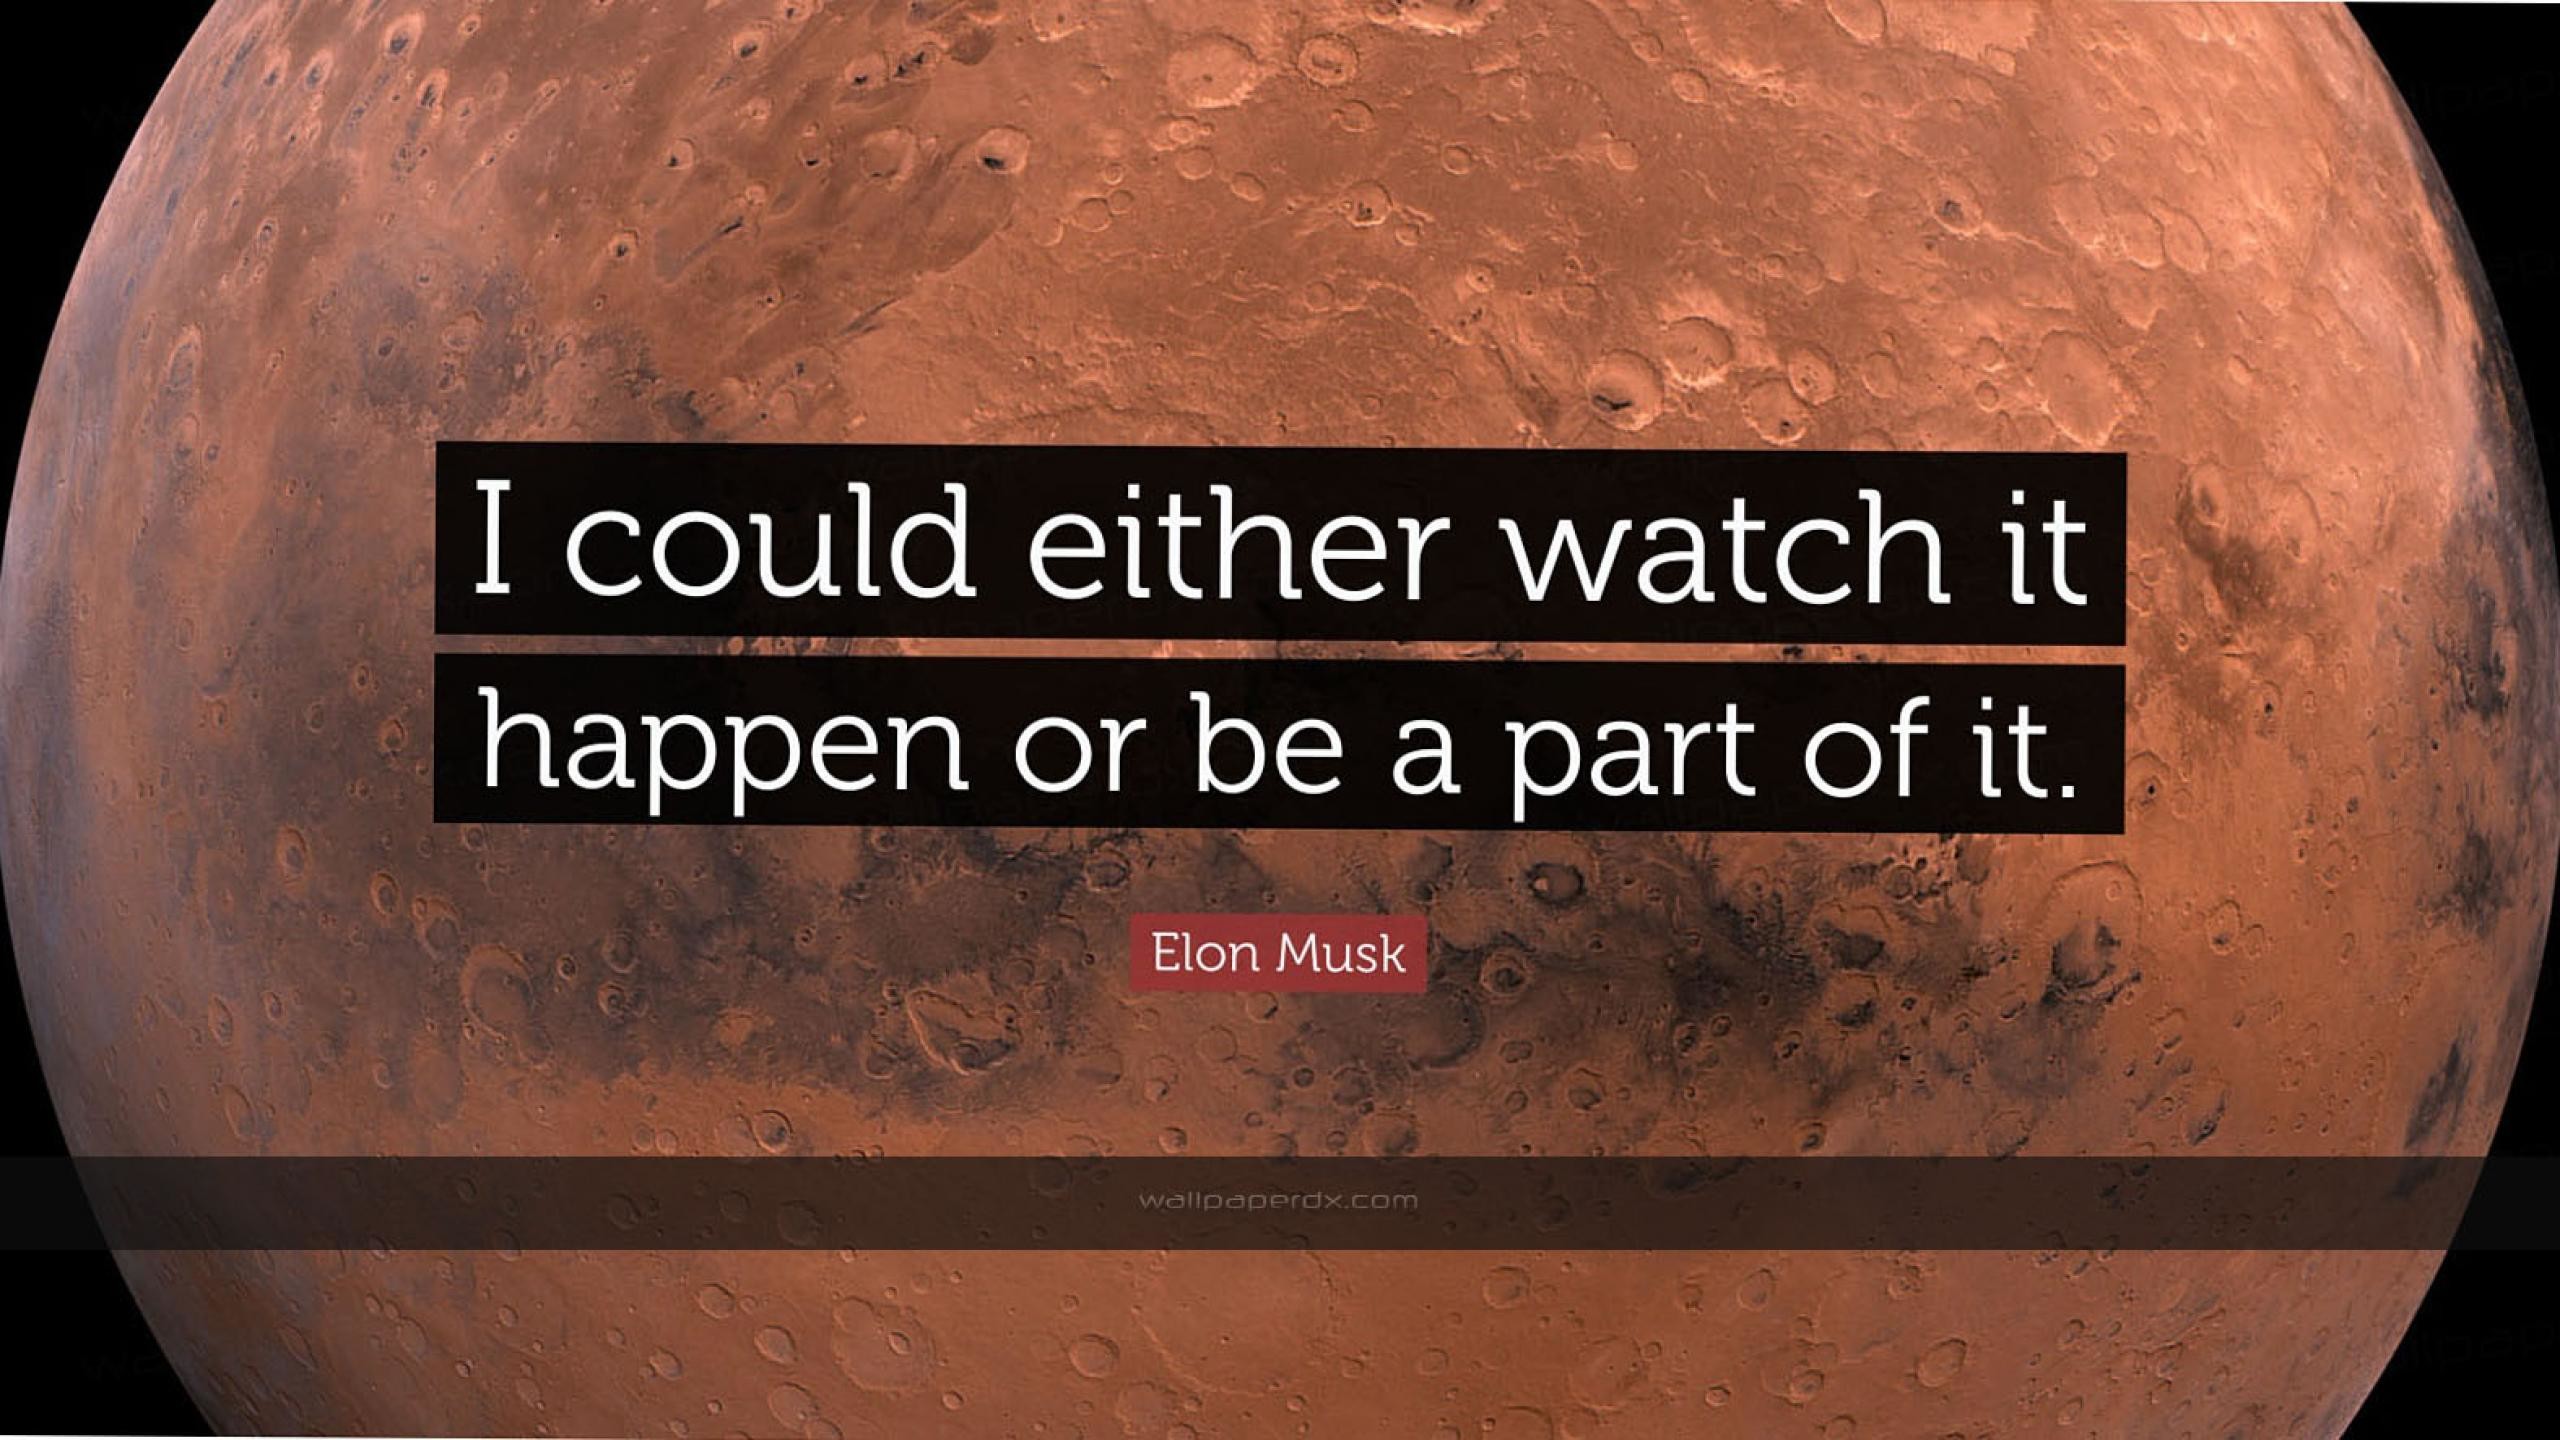 2560x1440 2341 elon musk quote i could either watch it happen or be a part of it hd  wallpaper - 2560 x 1440